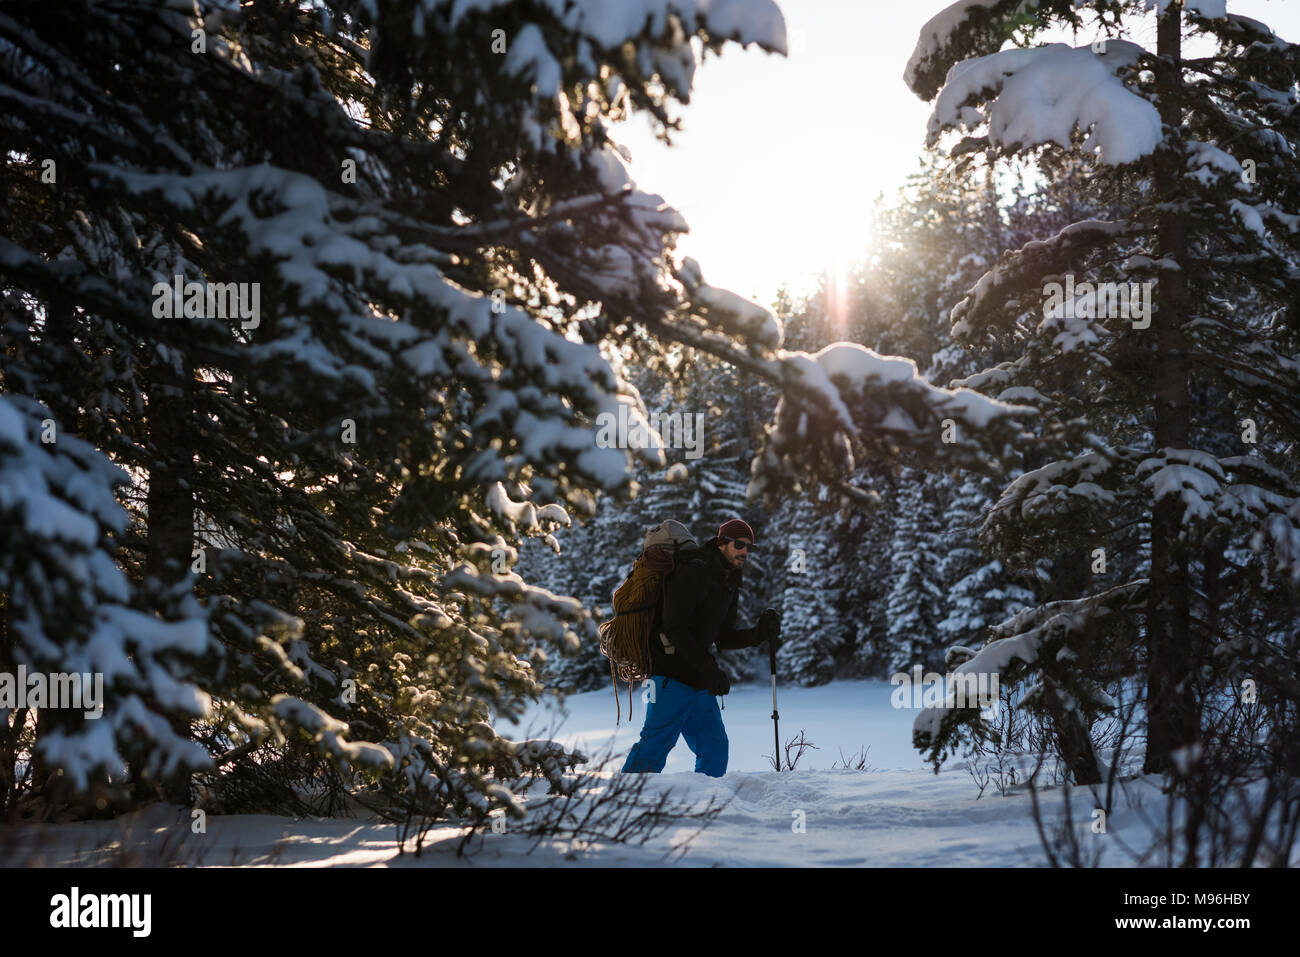 Man walking with backpack in snowy landscape Stock Photo